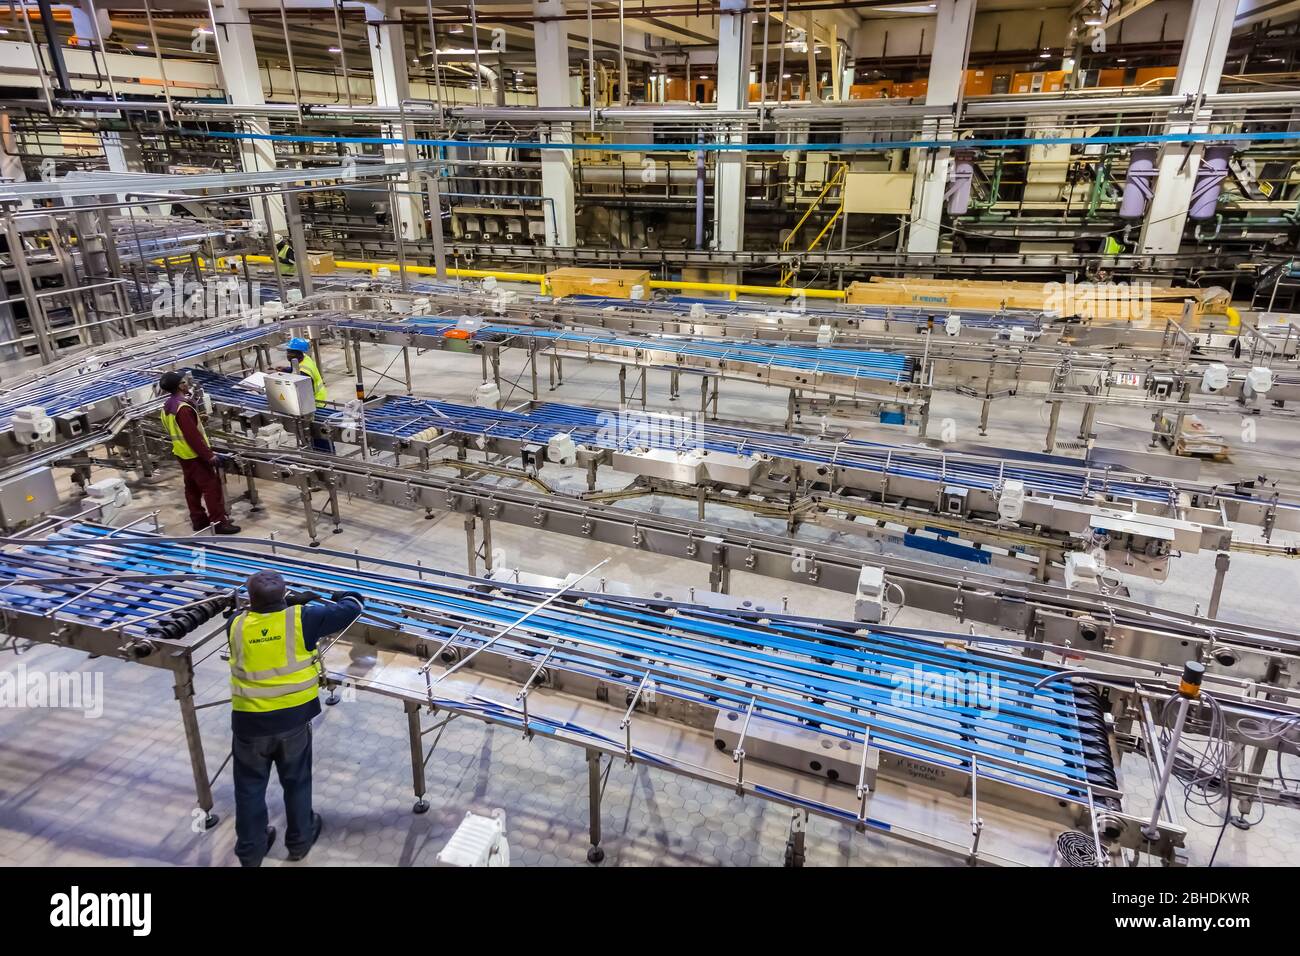 Johannesburg, South Africa - July 11, 2017: South African Breweries bottling plant undergoing an upgrade to its assembly line Stock Photo